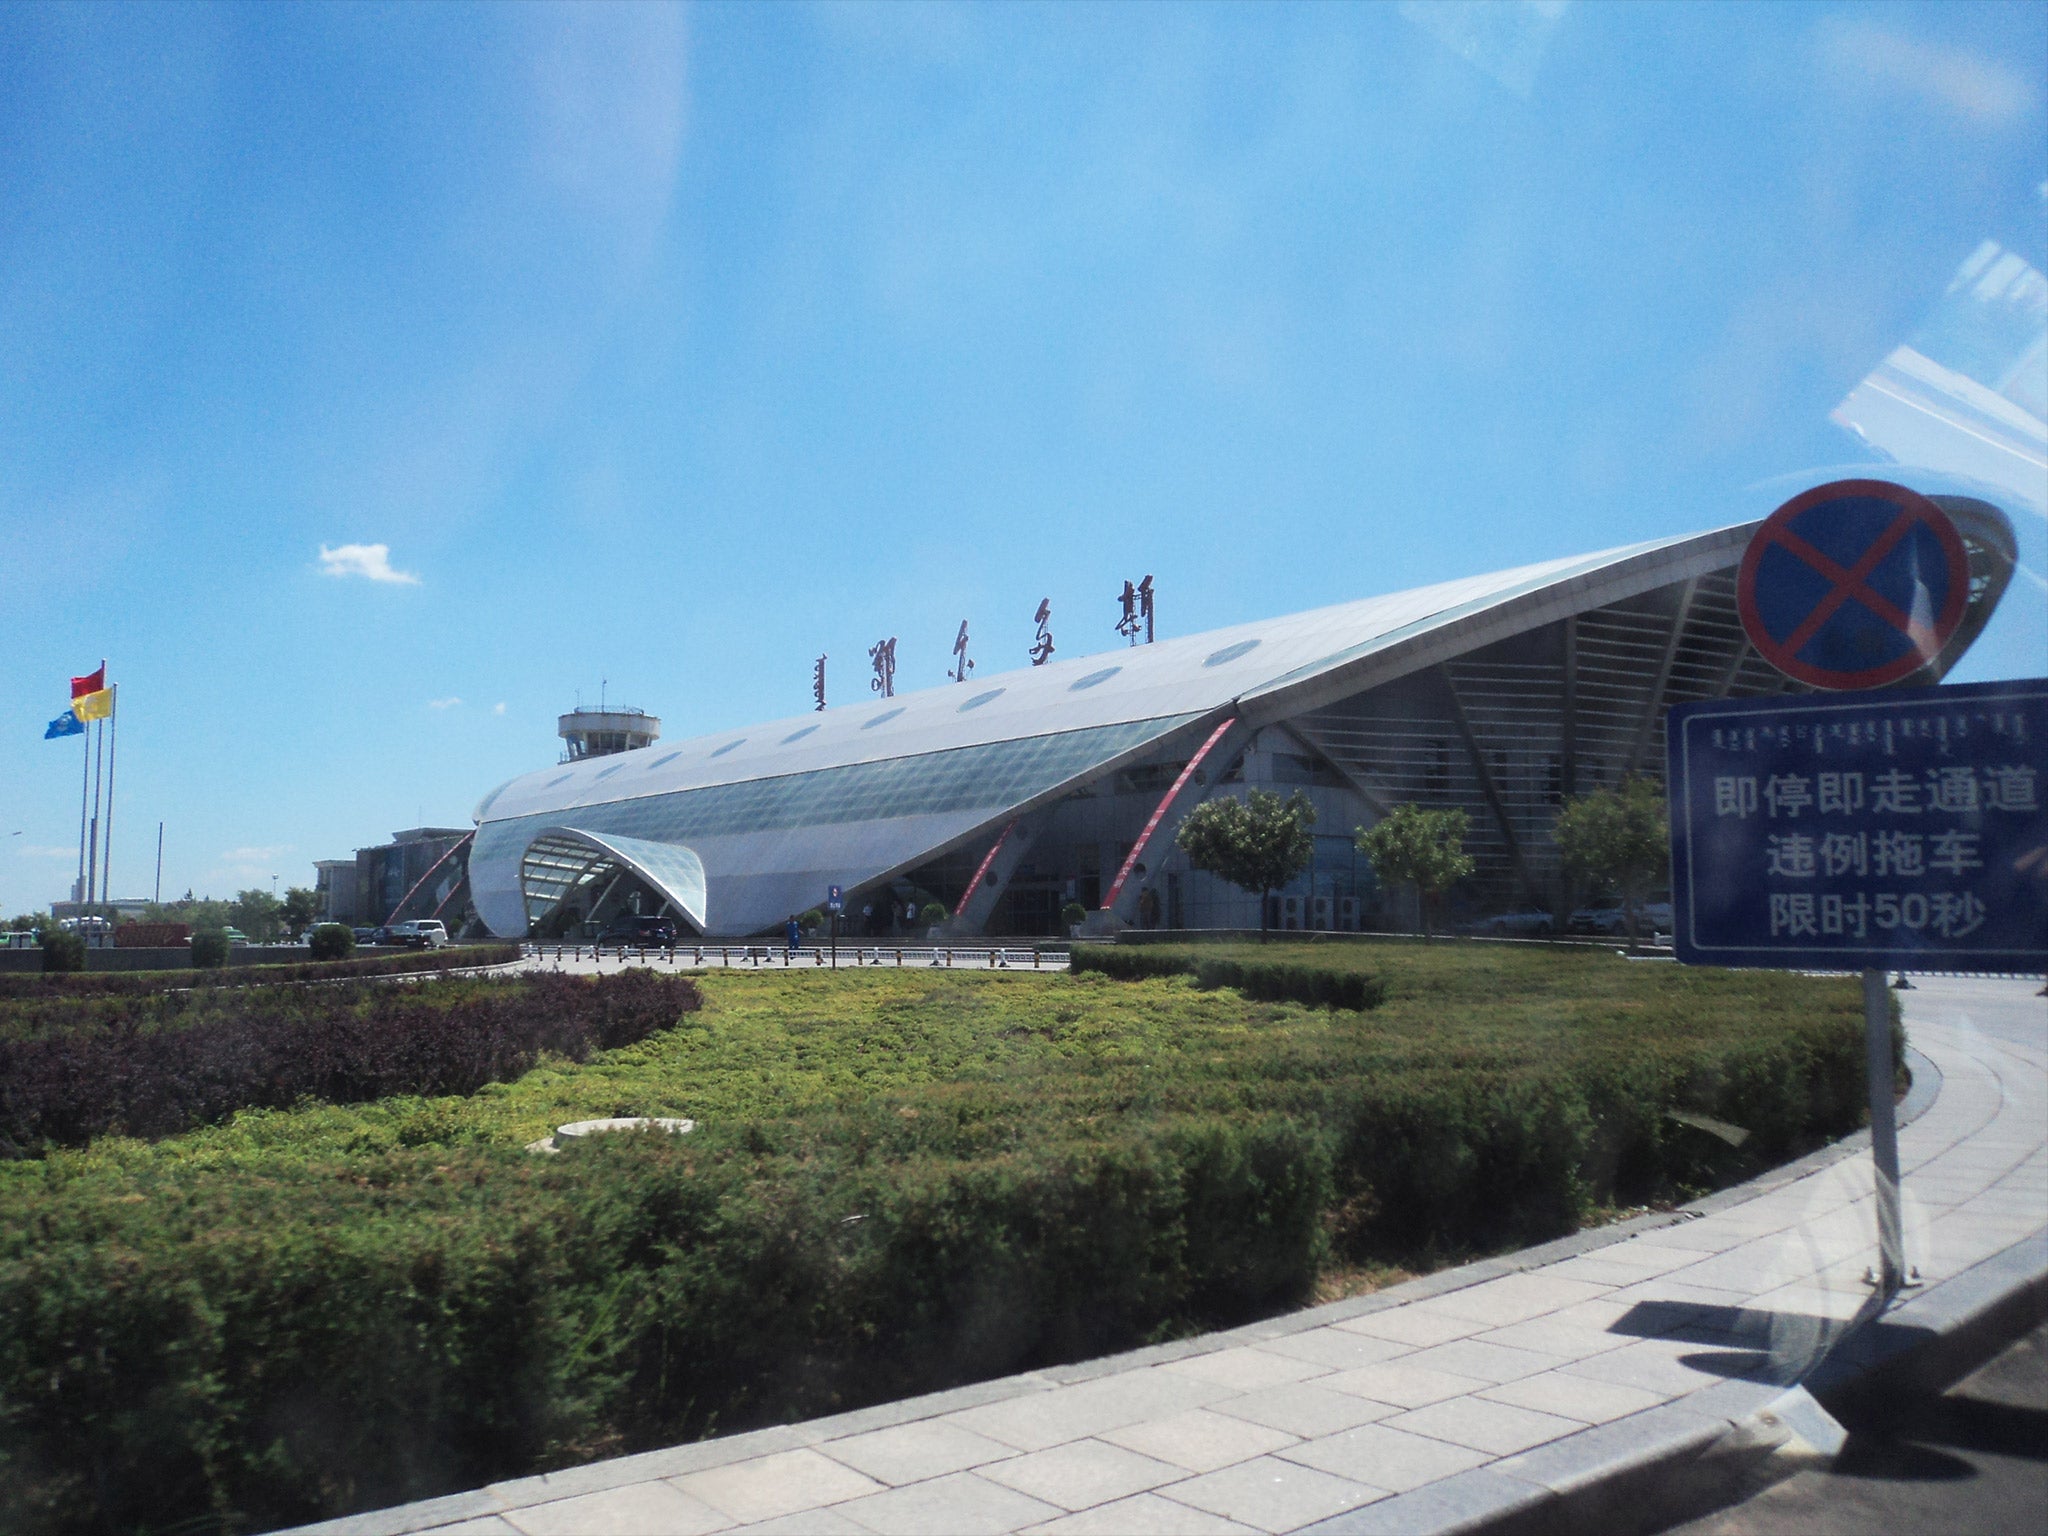 The group were detained at Ordos airport